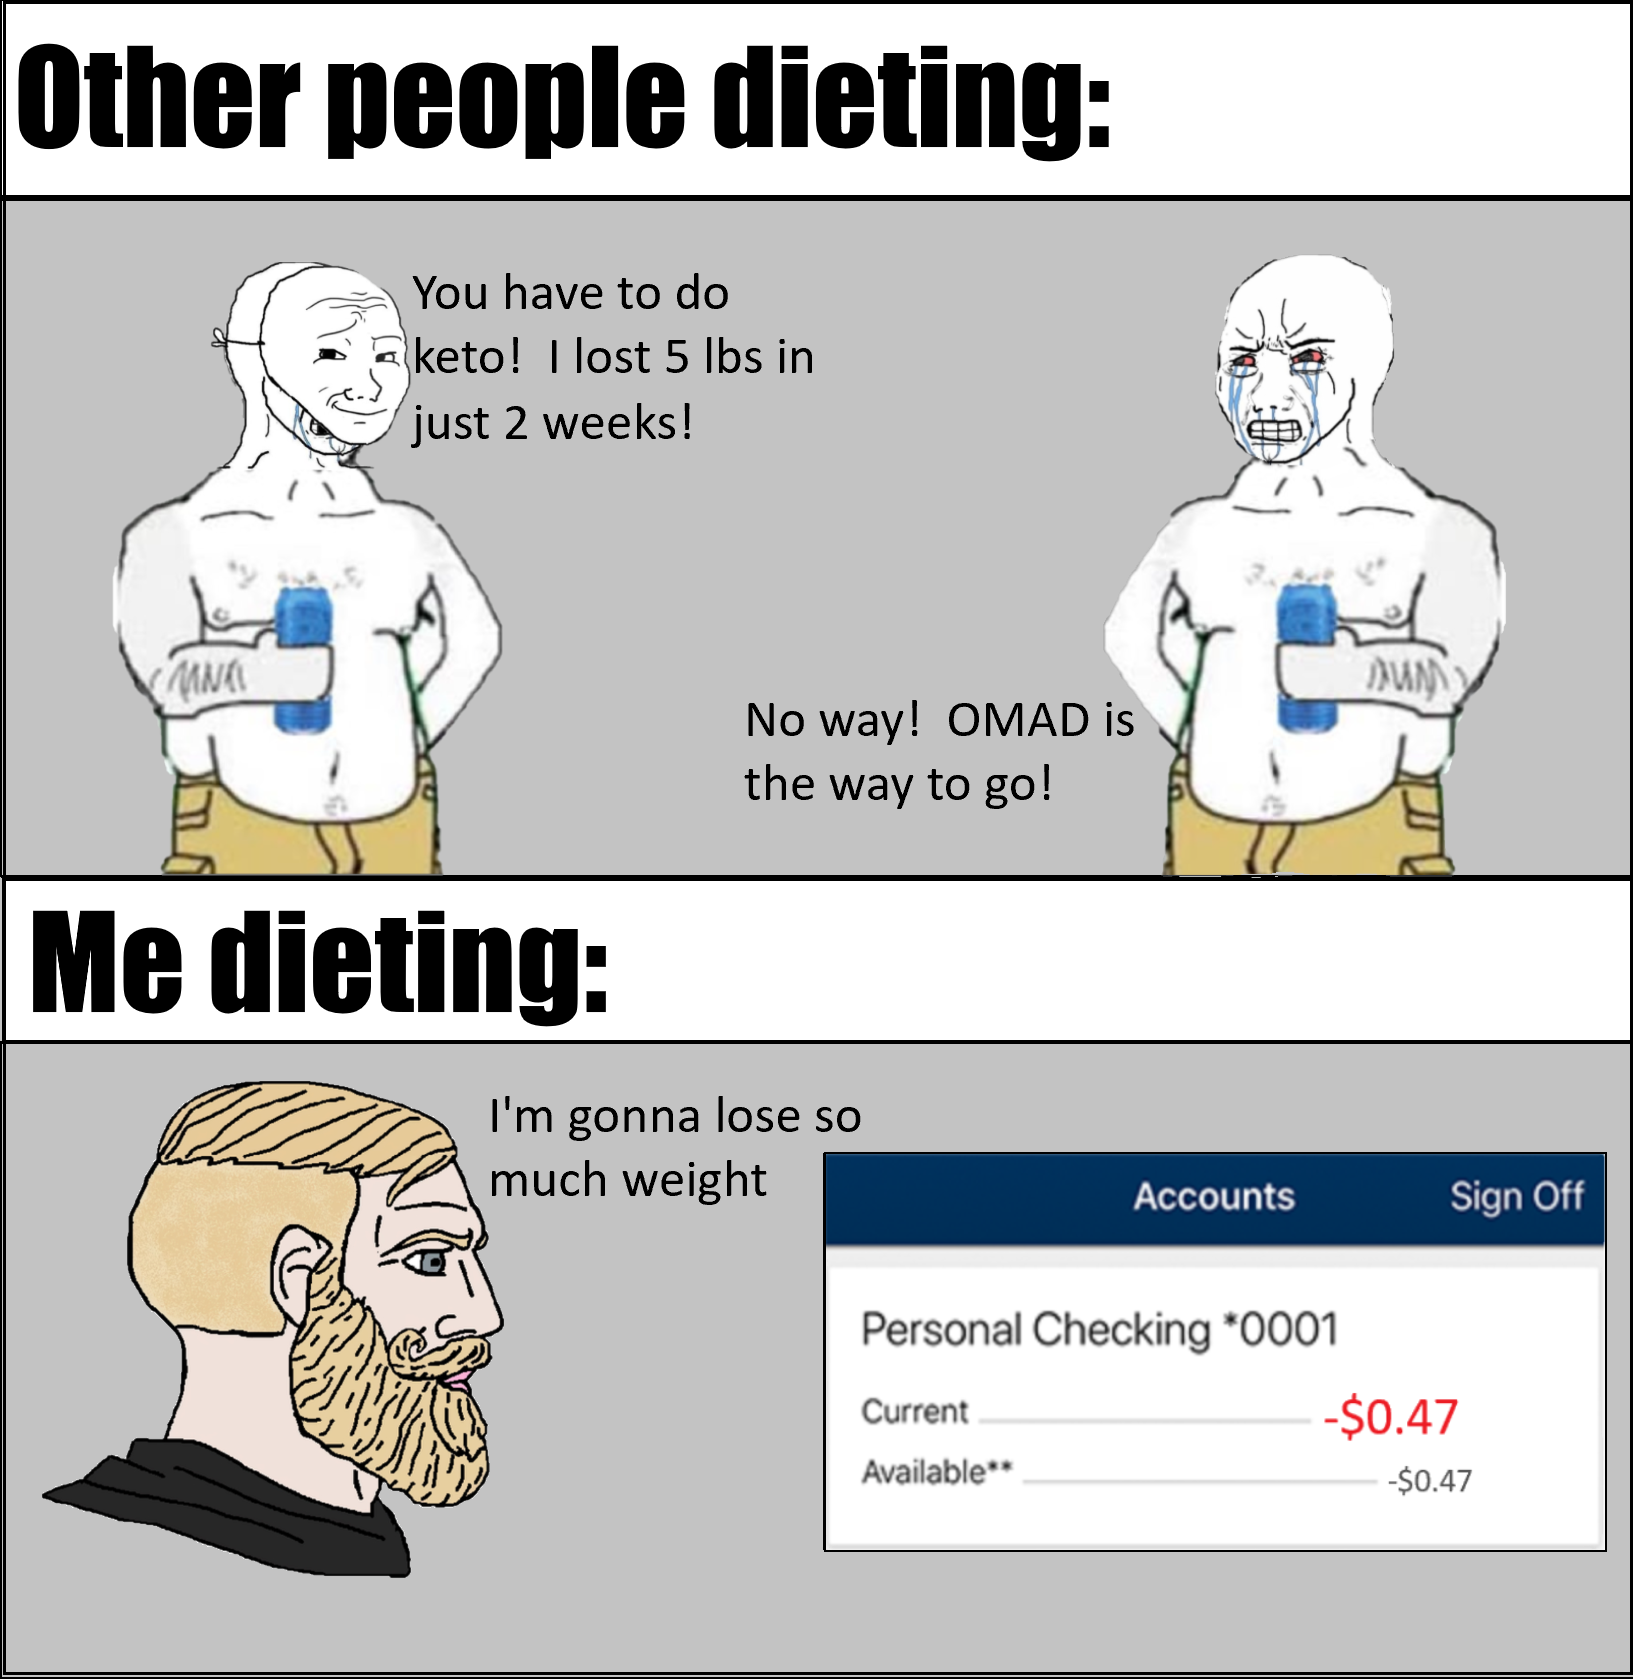 paving company - Other people dieting You have to do keto! I lost 5 lbs in just 2 weeks! Sun No way! Omad is the way to go! Me dieting I'm gonna lose so much weight Accounts Sign Off Personal Checking "0001 Current $0.47 Available $0.47